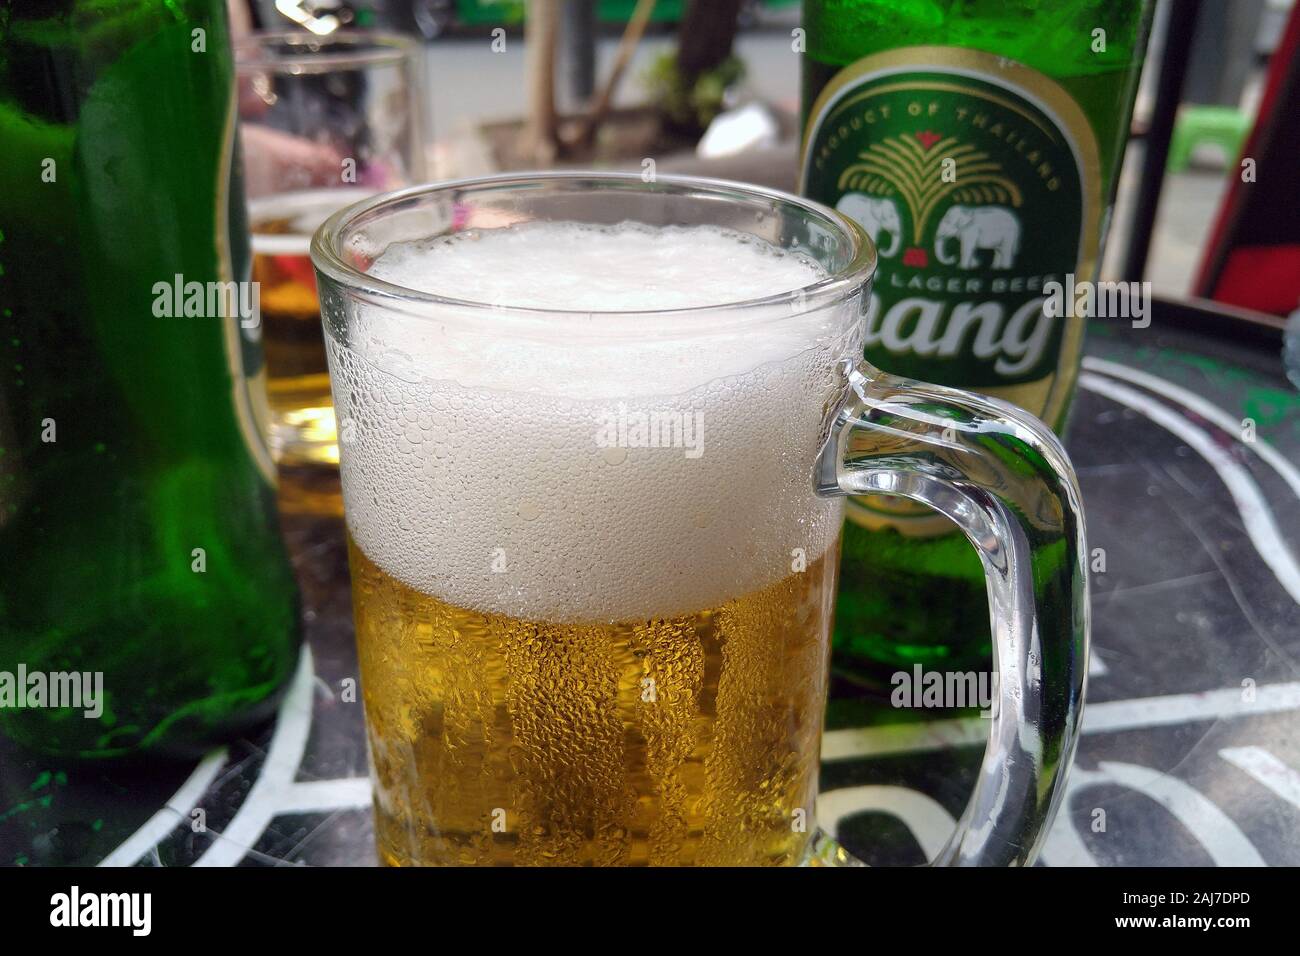 Glass with foamy Chang beer, bottle on background. Chang (Elephant in English) is ThaiBev's flagship brand. Stock Photo